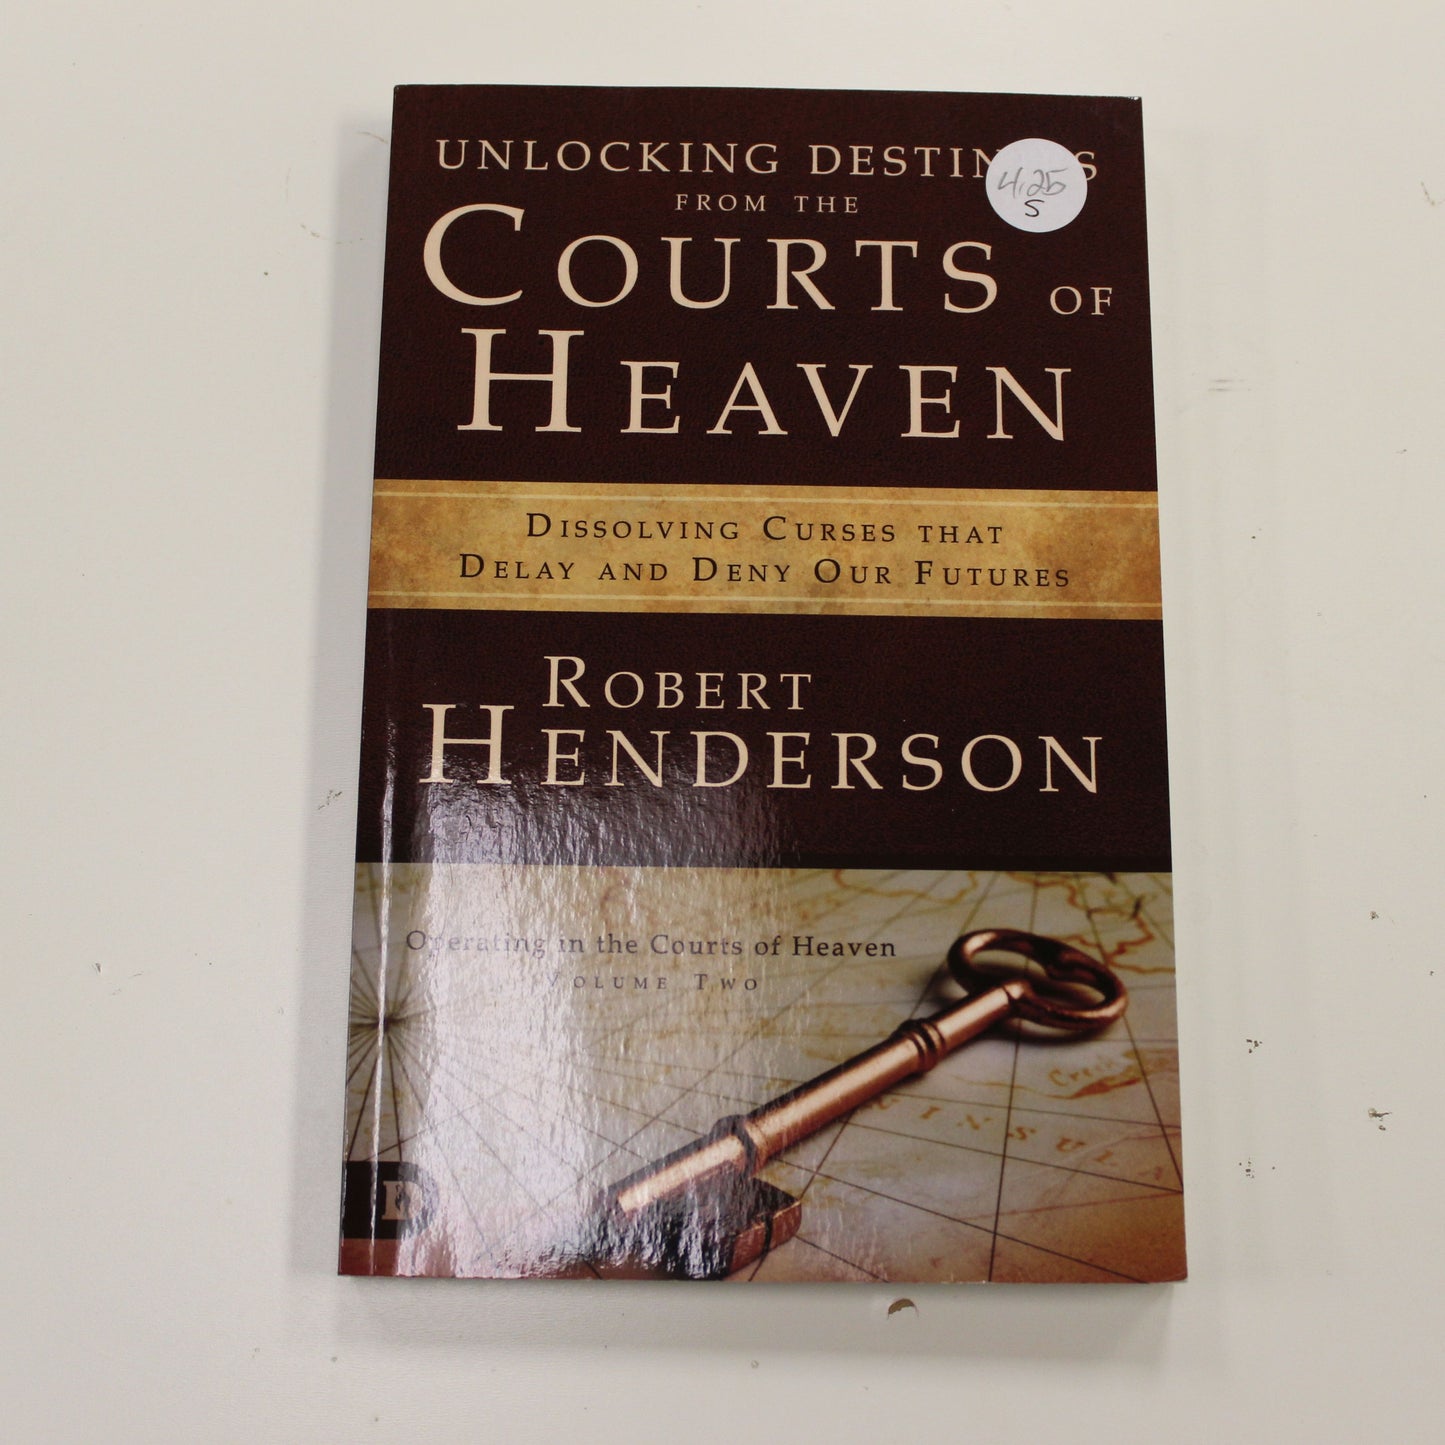 UNLOCKING DESTINIES FROM THE COURTS OF HEAVEN